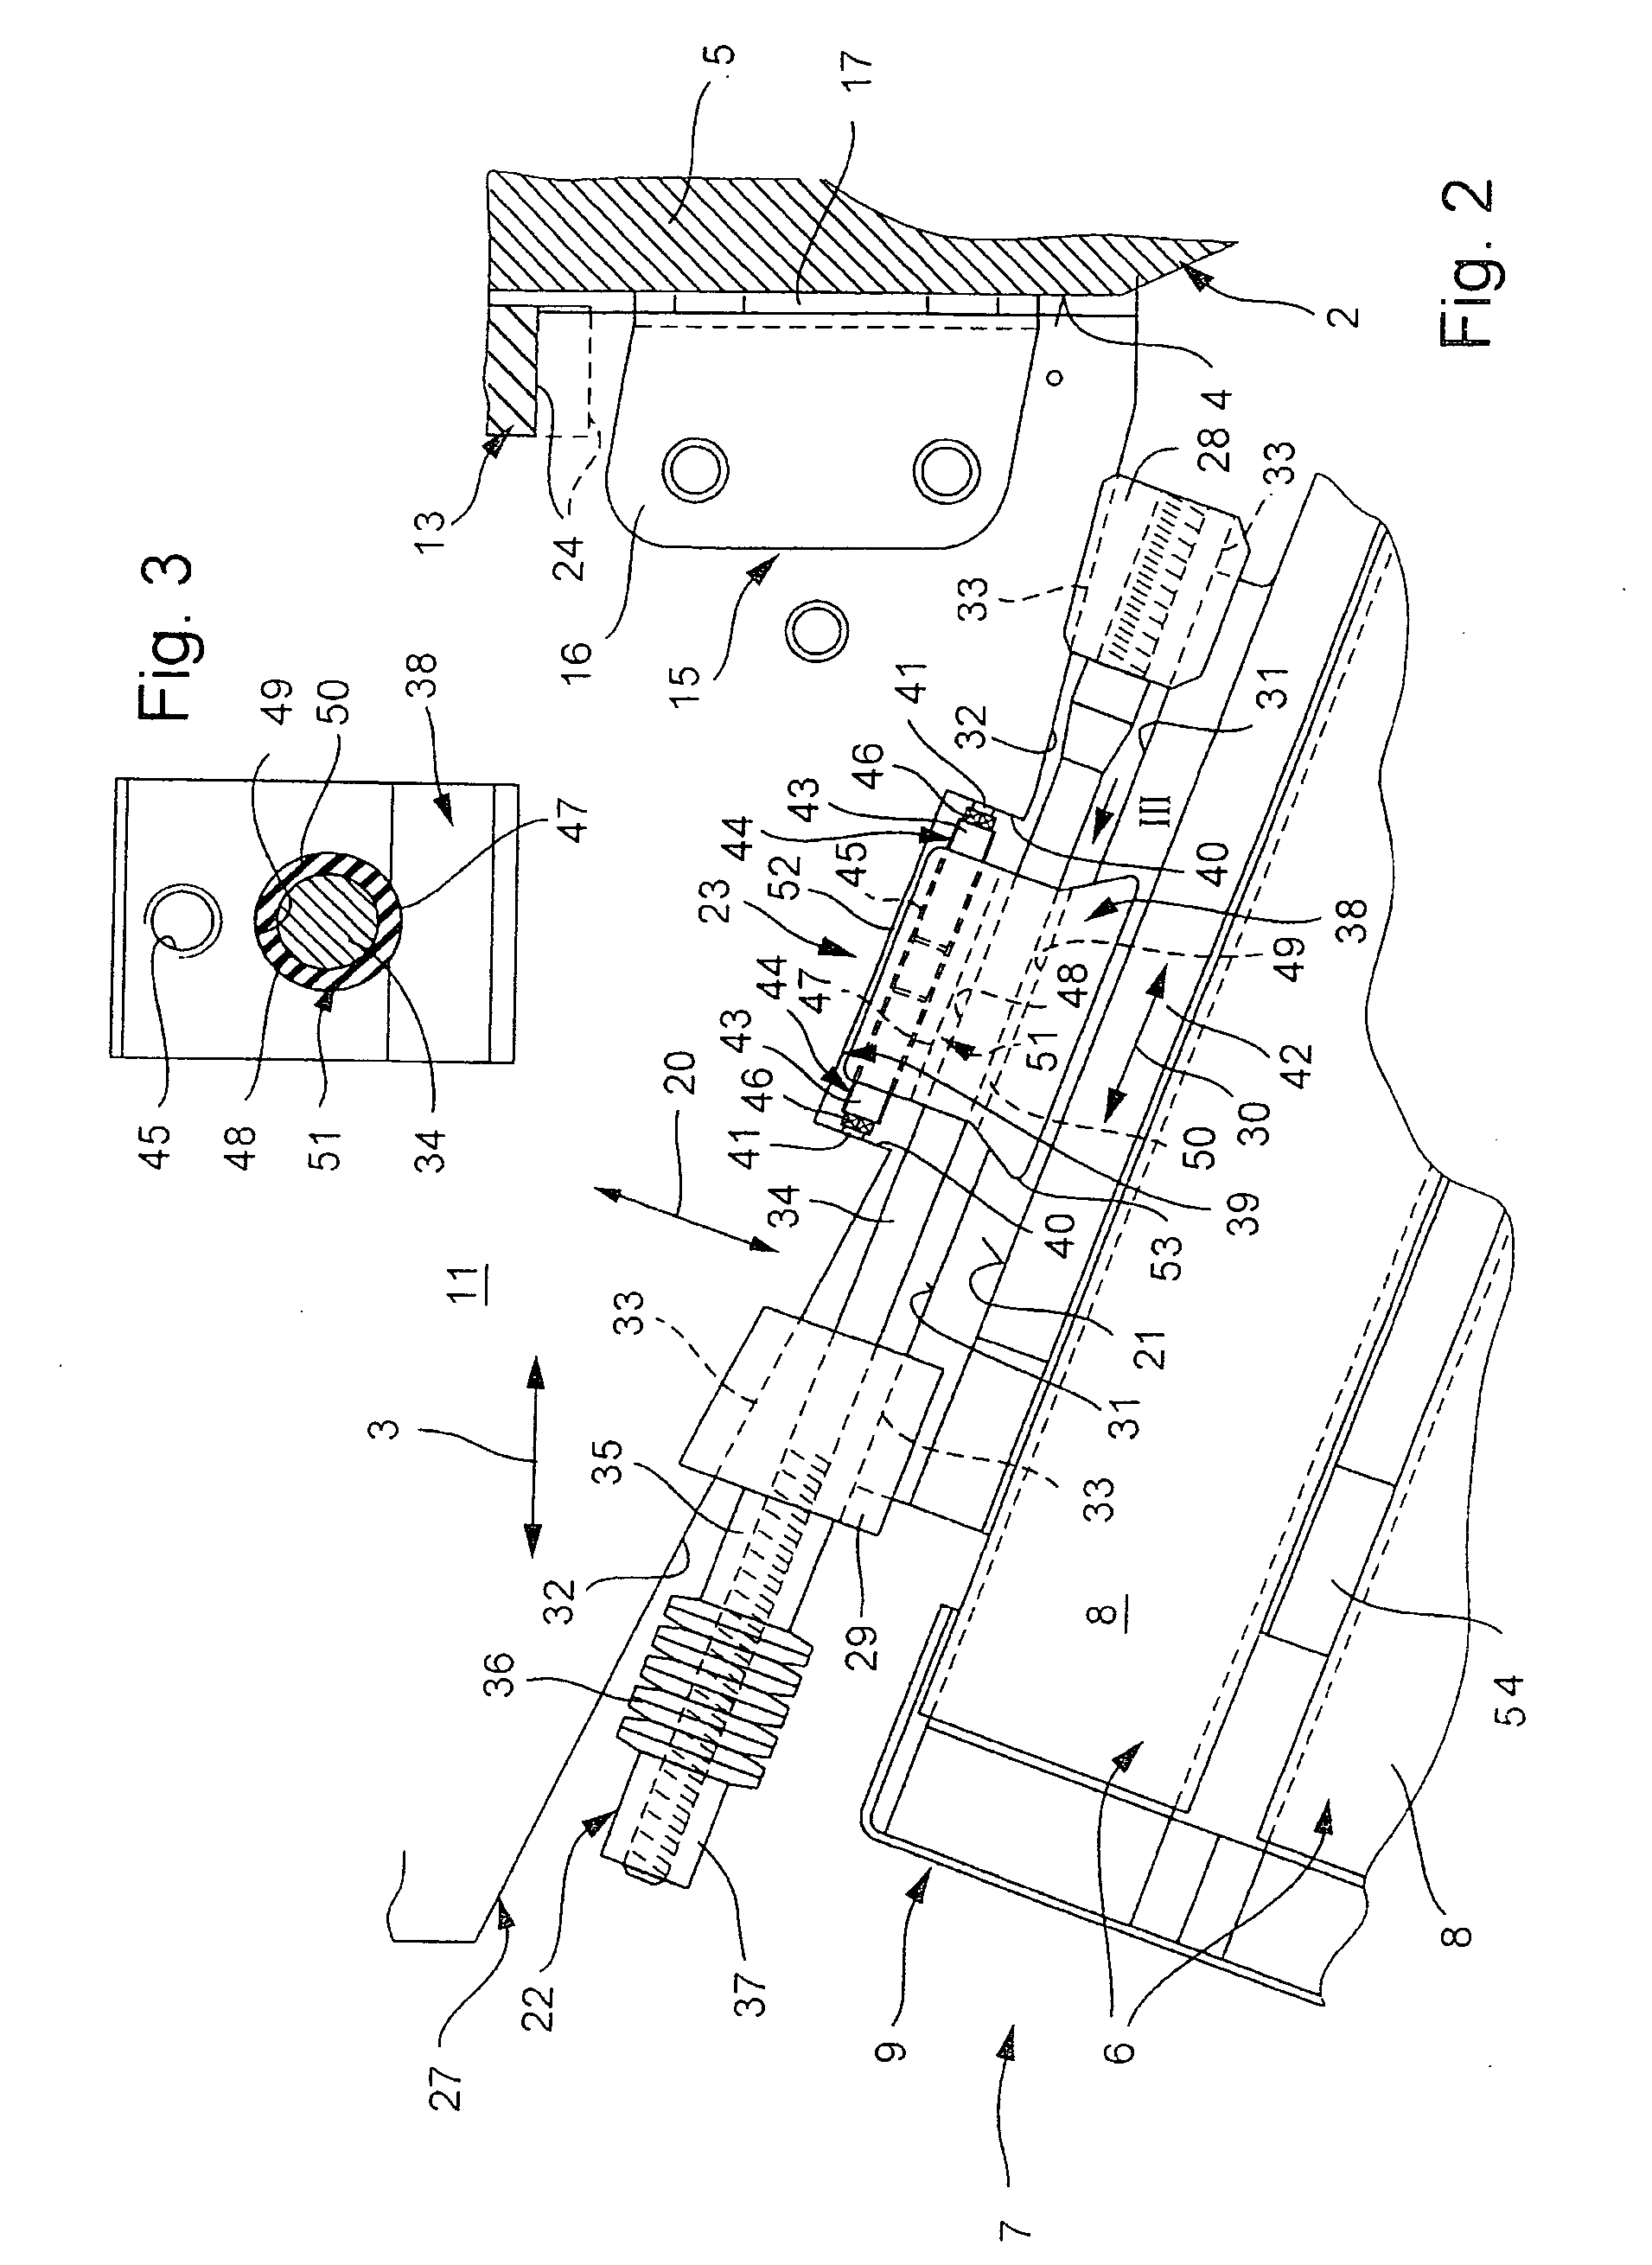 Apparatus for supporting a stator end winding